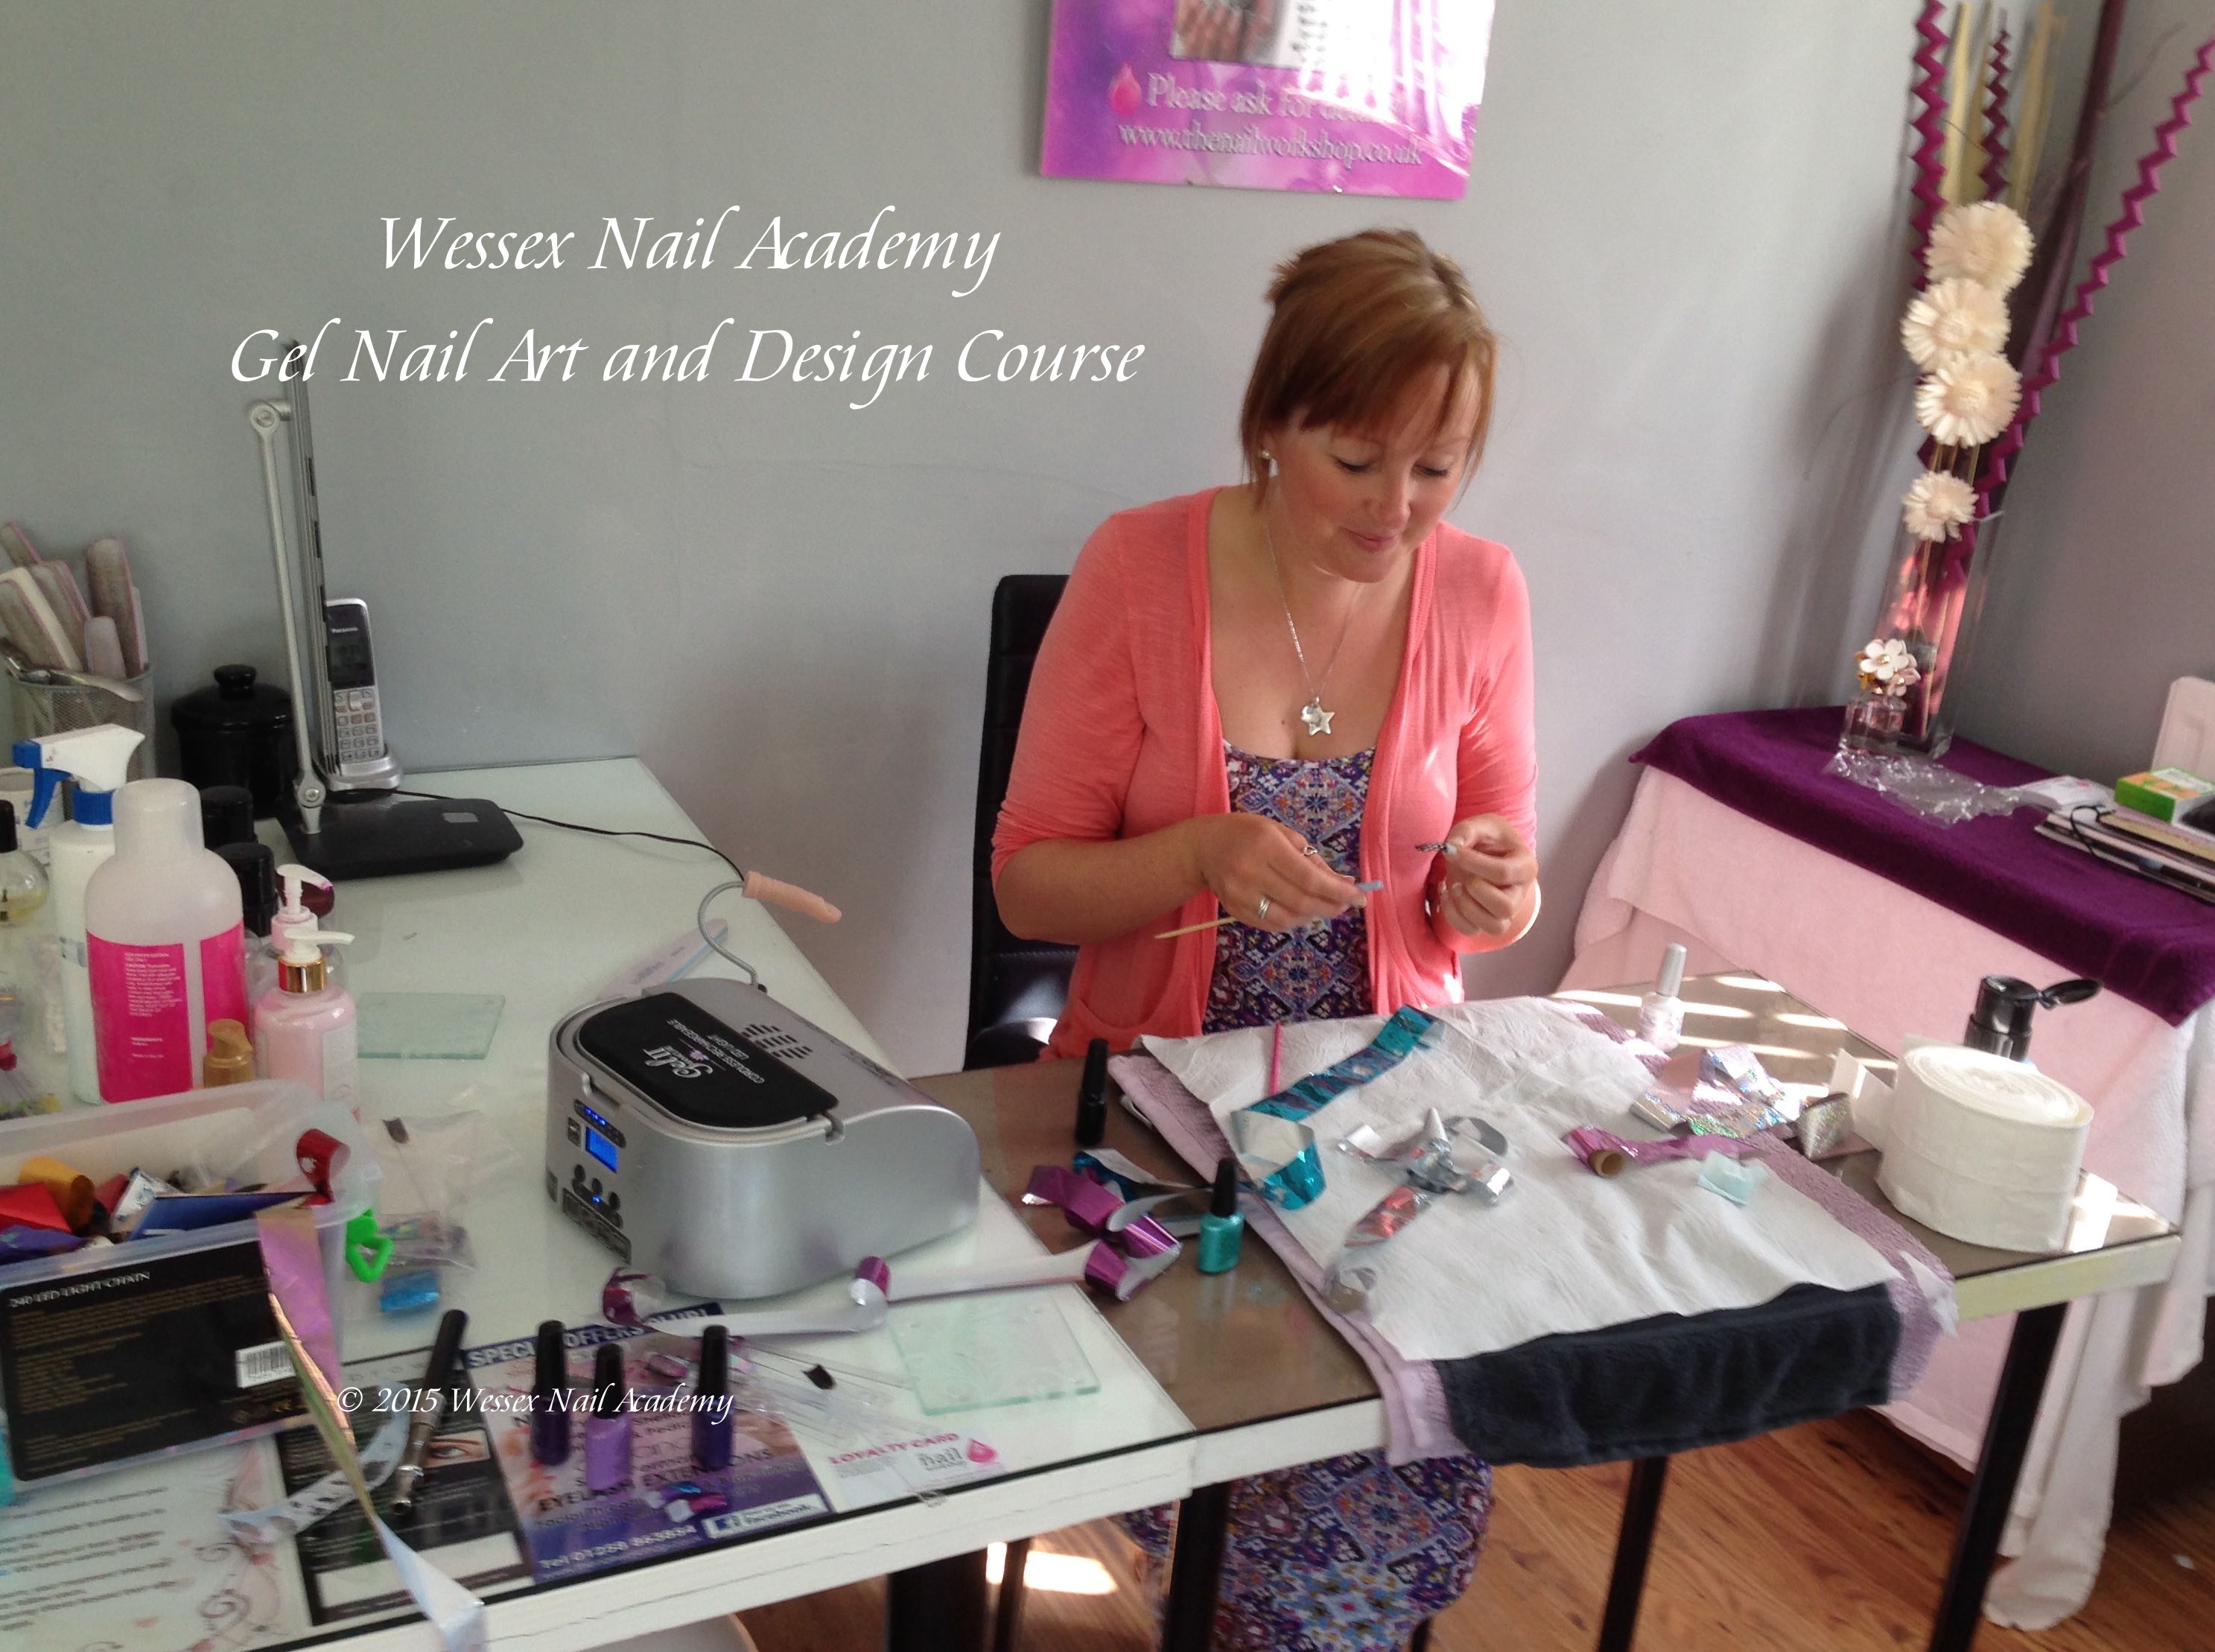 Nail Art Course, Nail extension training, nail training course, Wessex Nail Academy Okeford Fitzpaine, Dorset